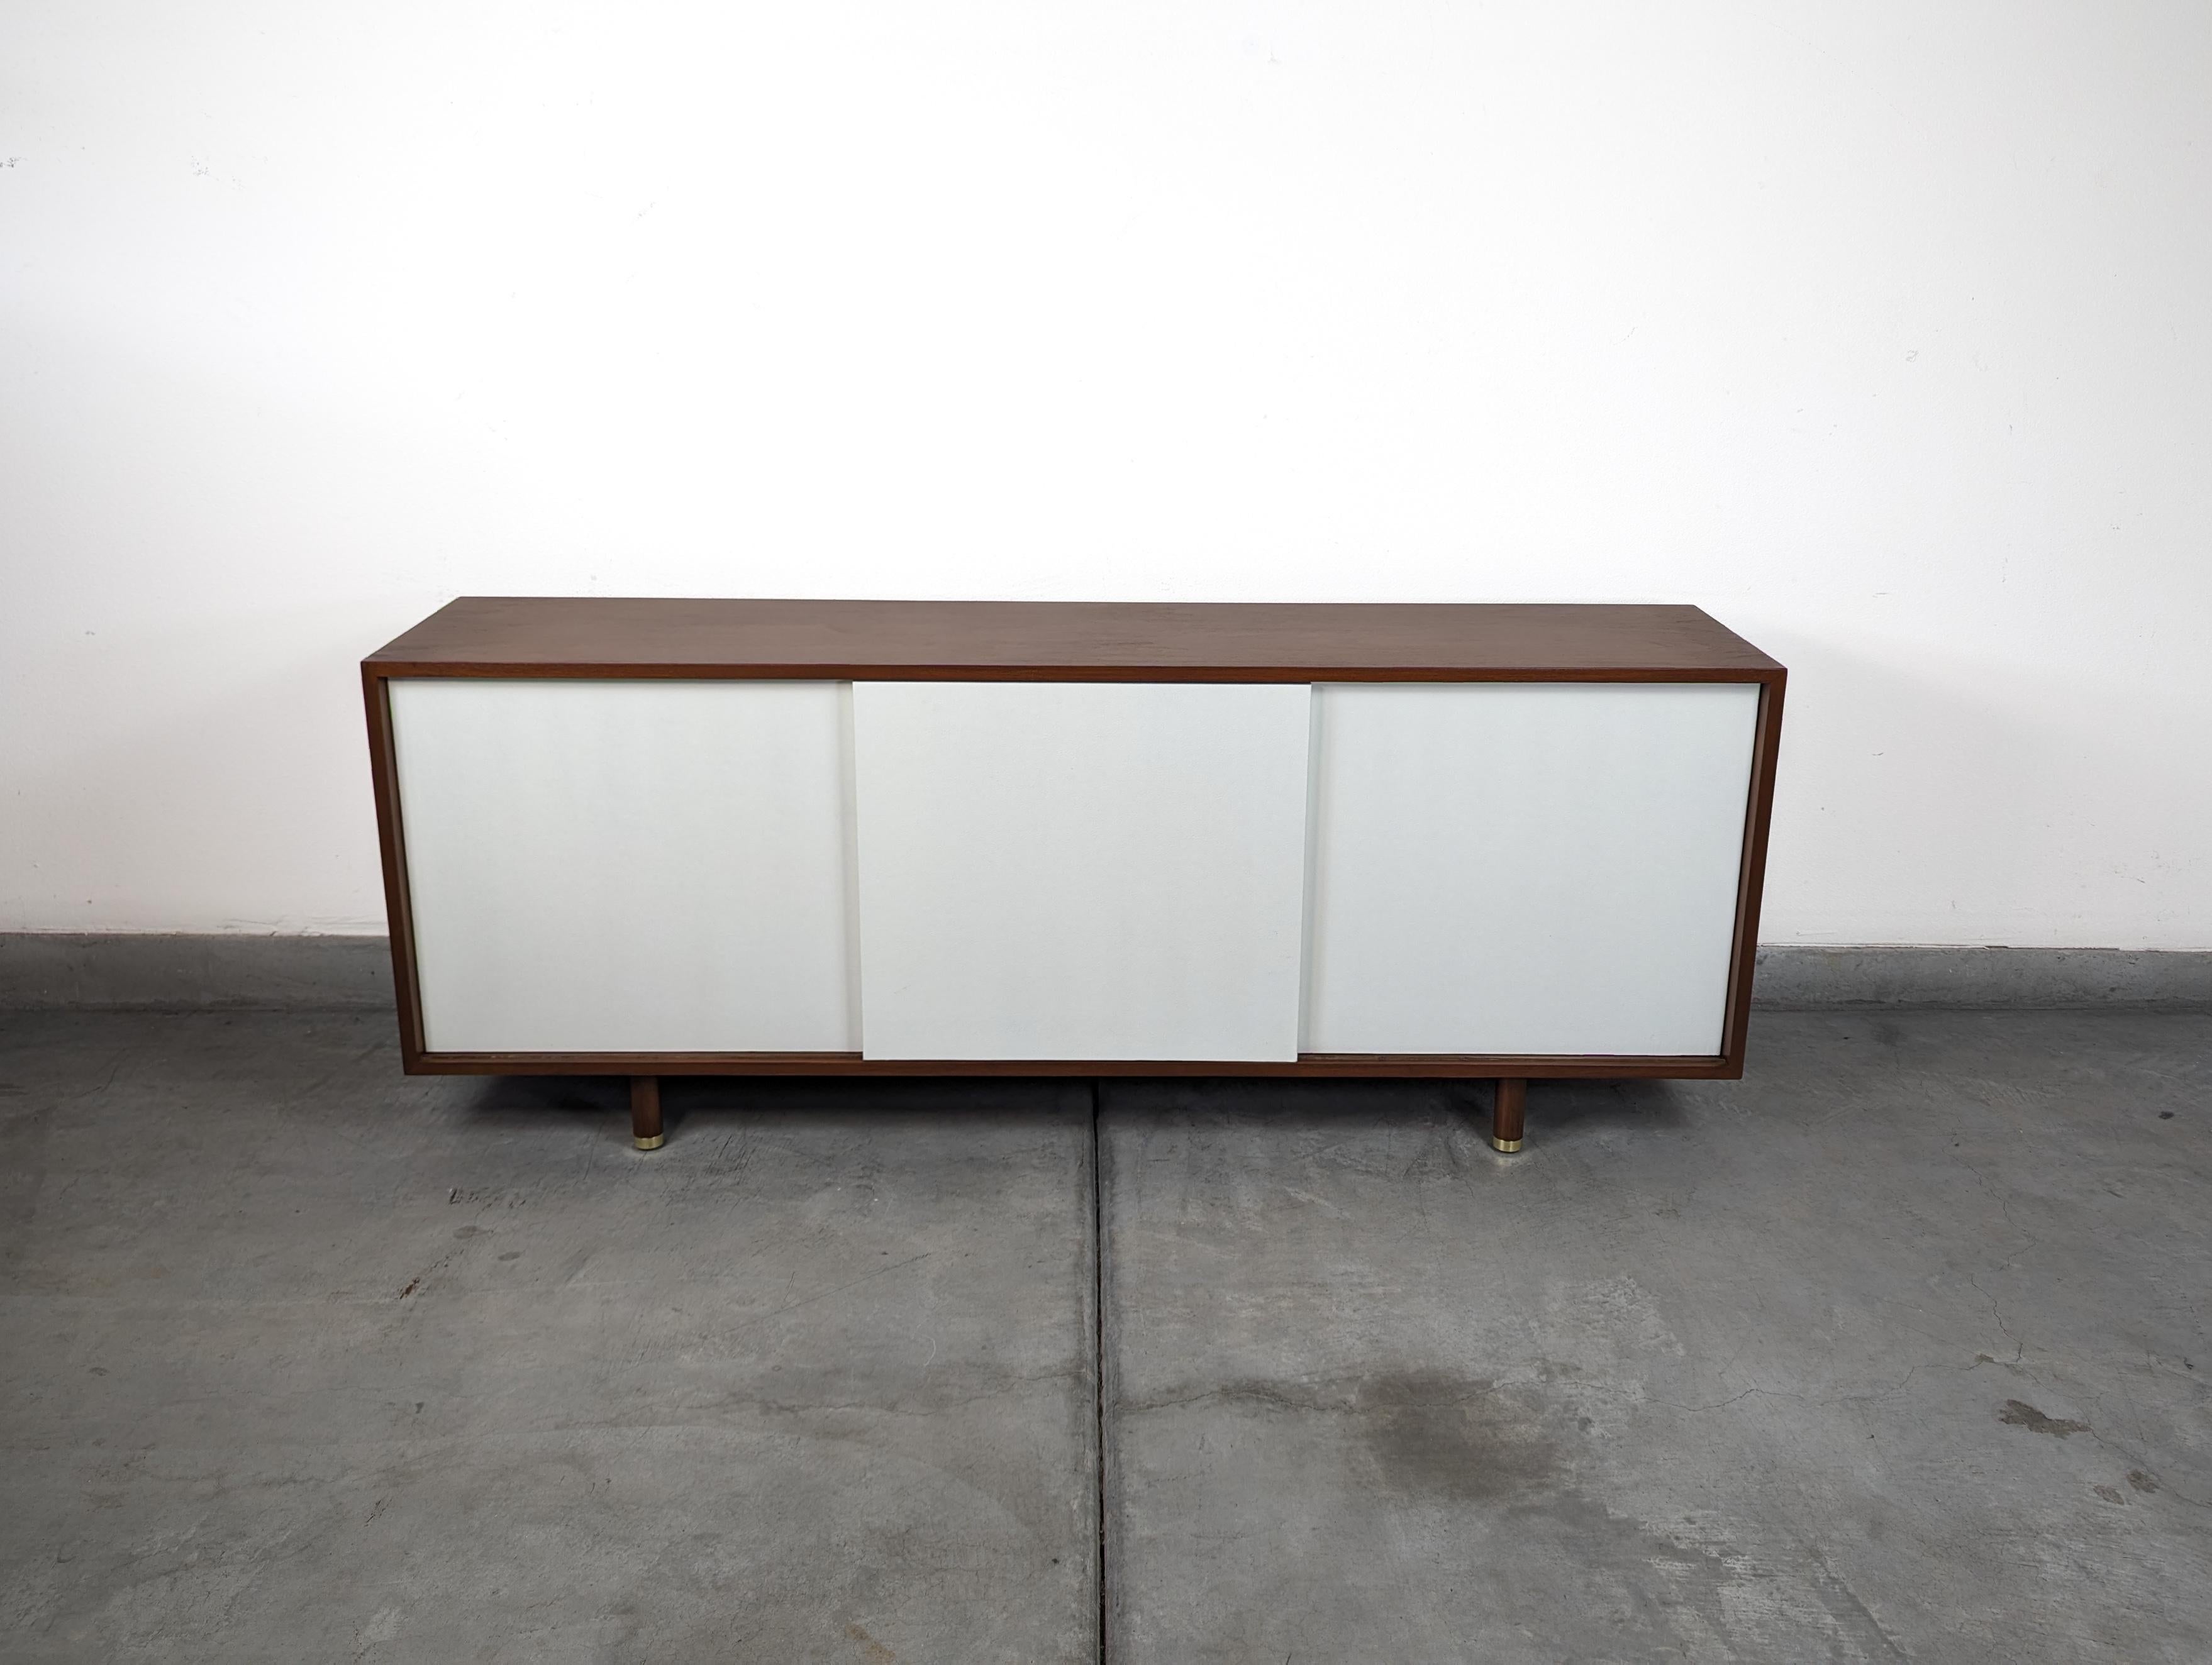 Seize the opportunity to own a slice of design history with this exquisite vintage mid-century modern credenza, masterfully designed by the legendary Edward Wormley for Dunbar, hailing from the creative zenith of the 1960s. This credenza is a